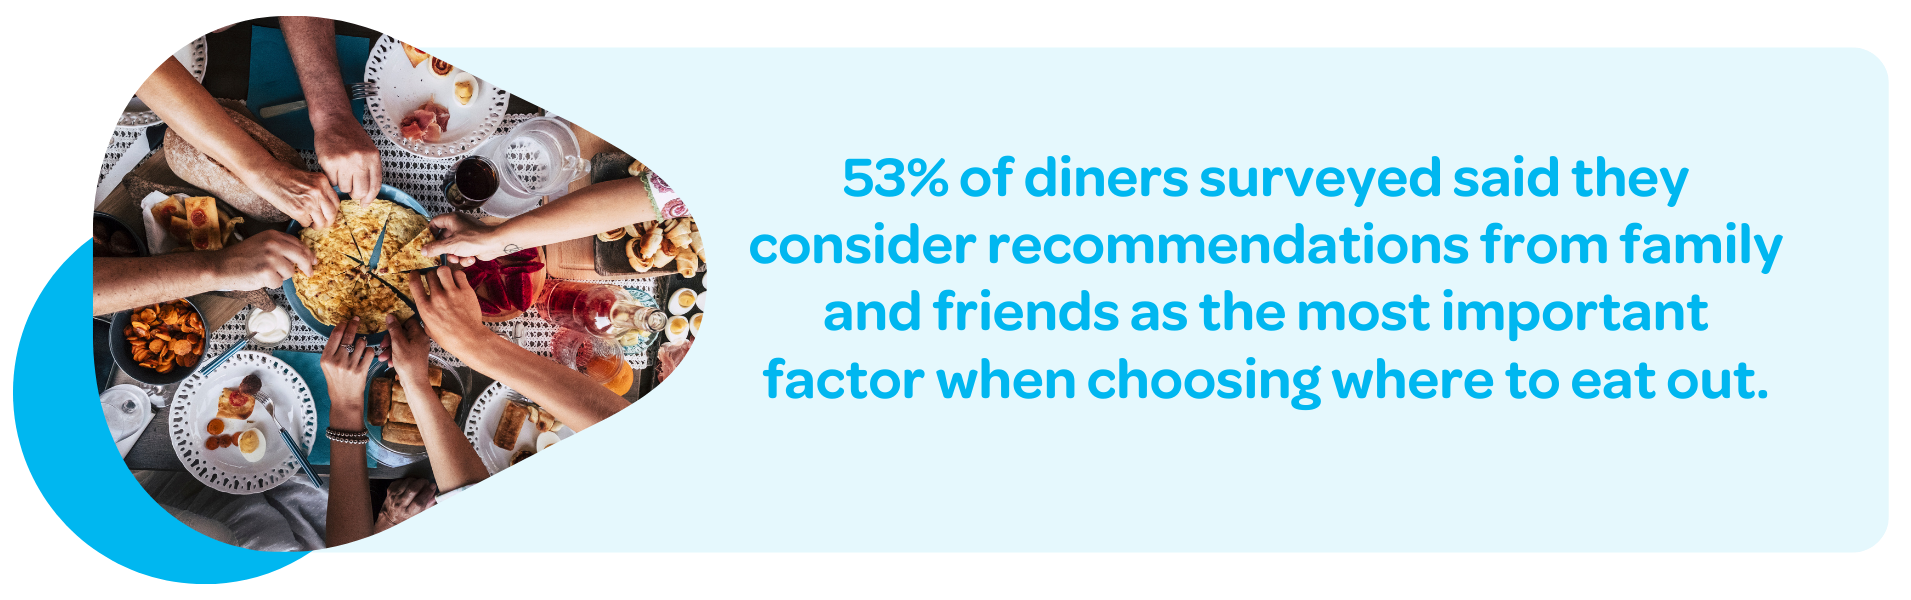 53% of diners surveyed said they consider recommendations from family and friends as the most important factor when choosing where to eat out.